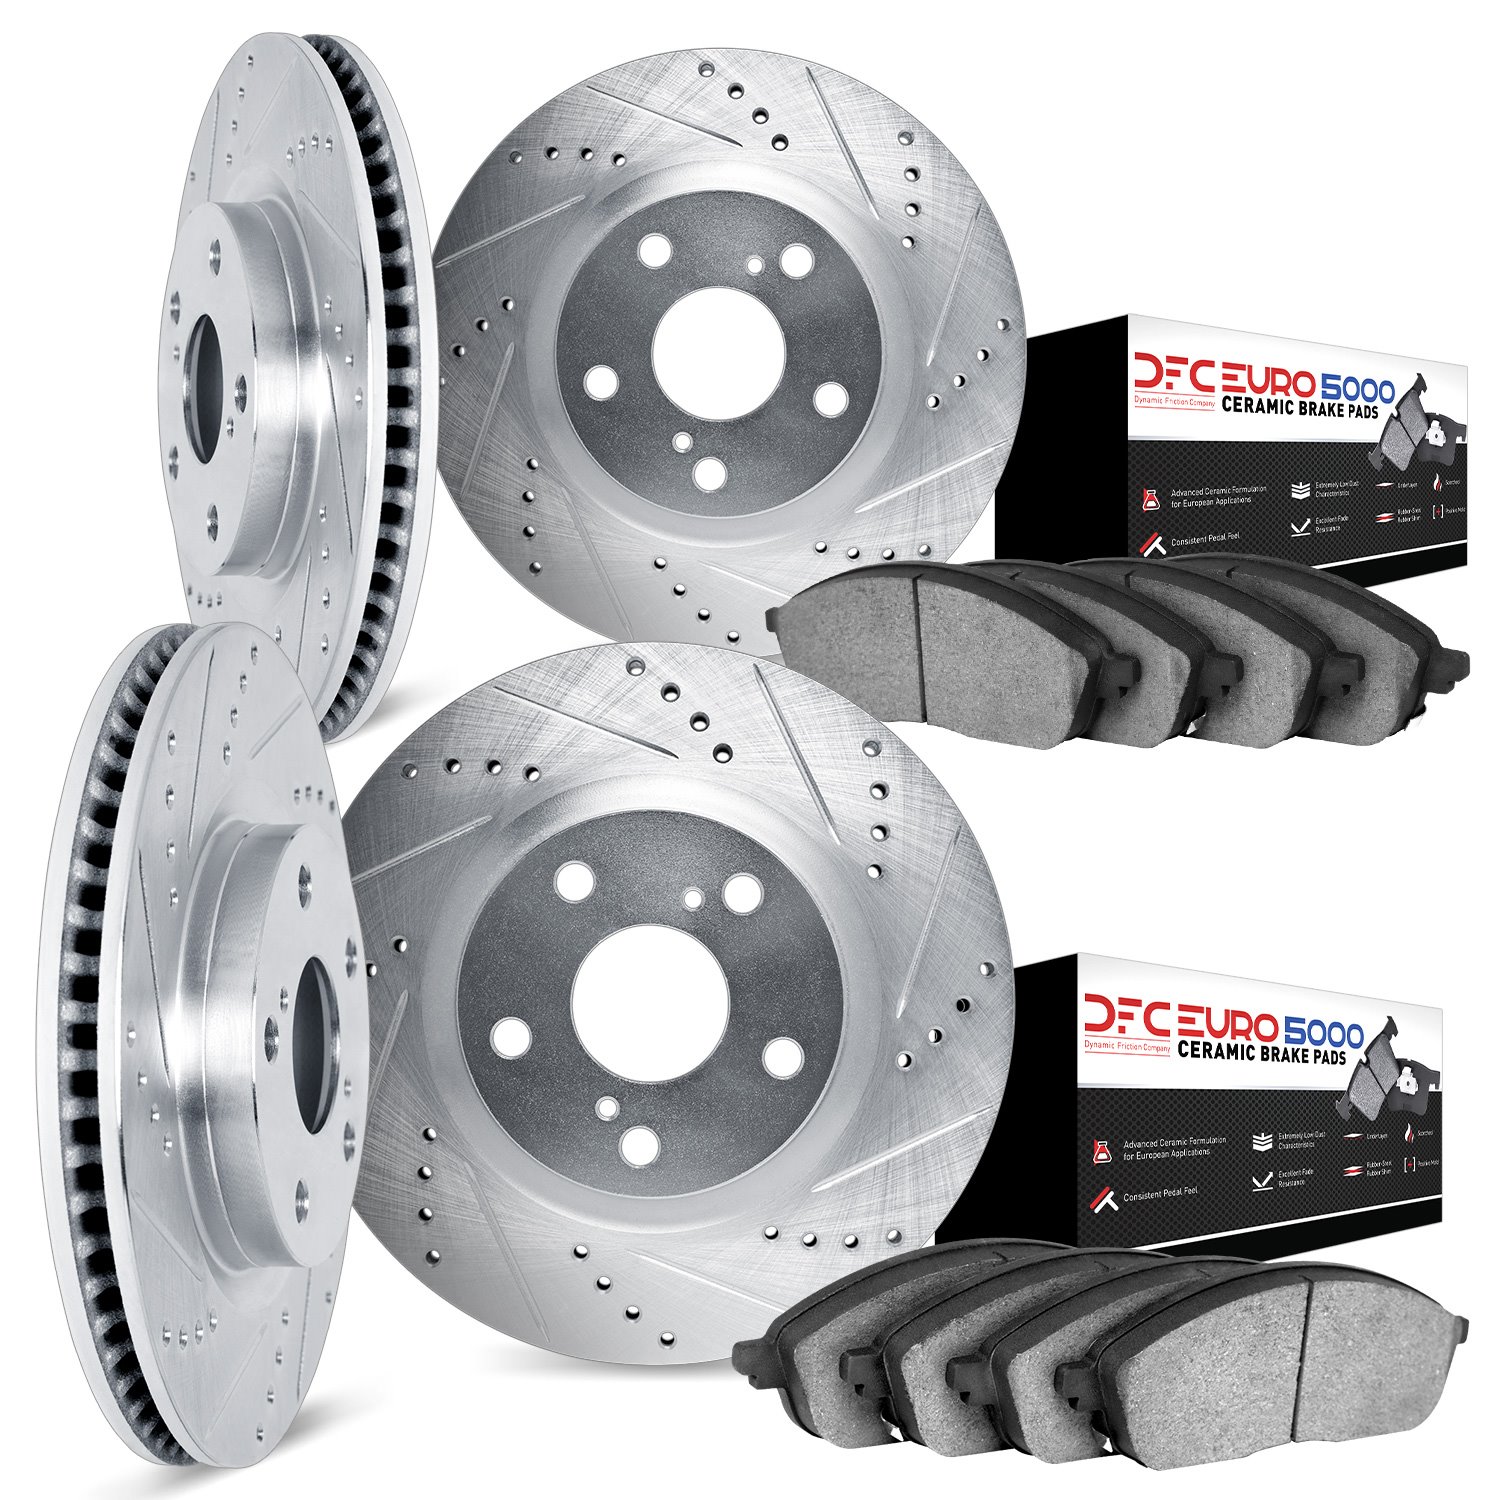 7604-42001 Drilled/Slotted Brake Rotors w/5000 Euro Ceramic Brake Pads Kit [Silver], Fits Select Mopar, Position: Front and Rear